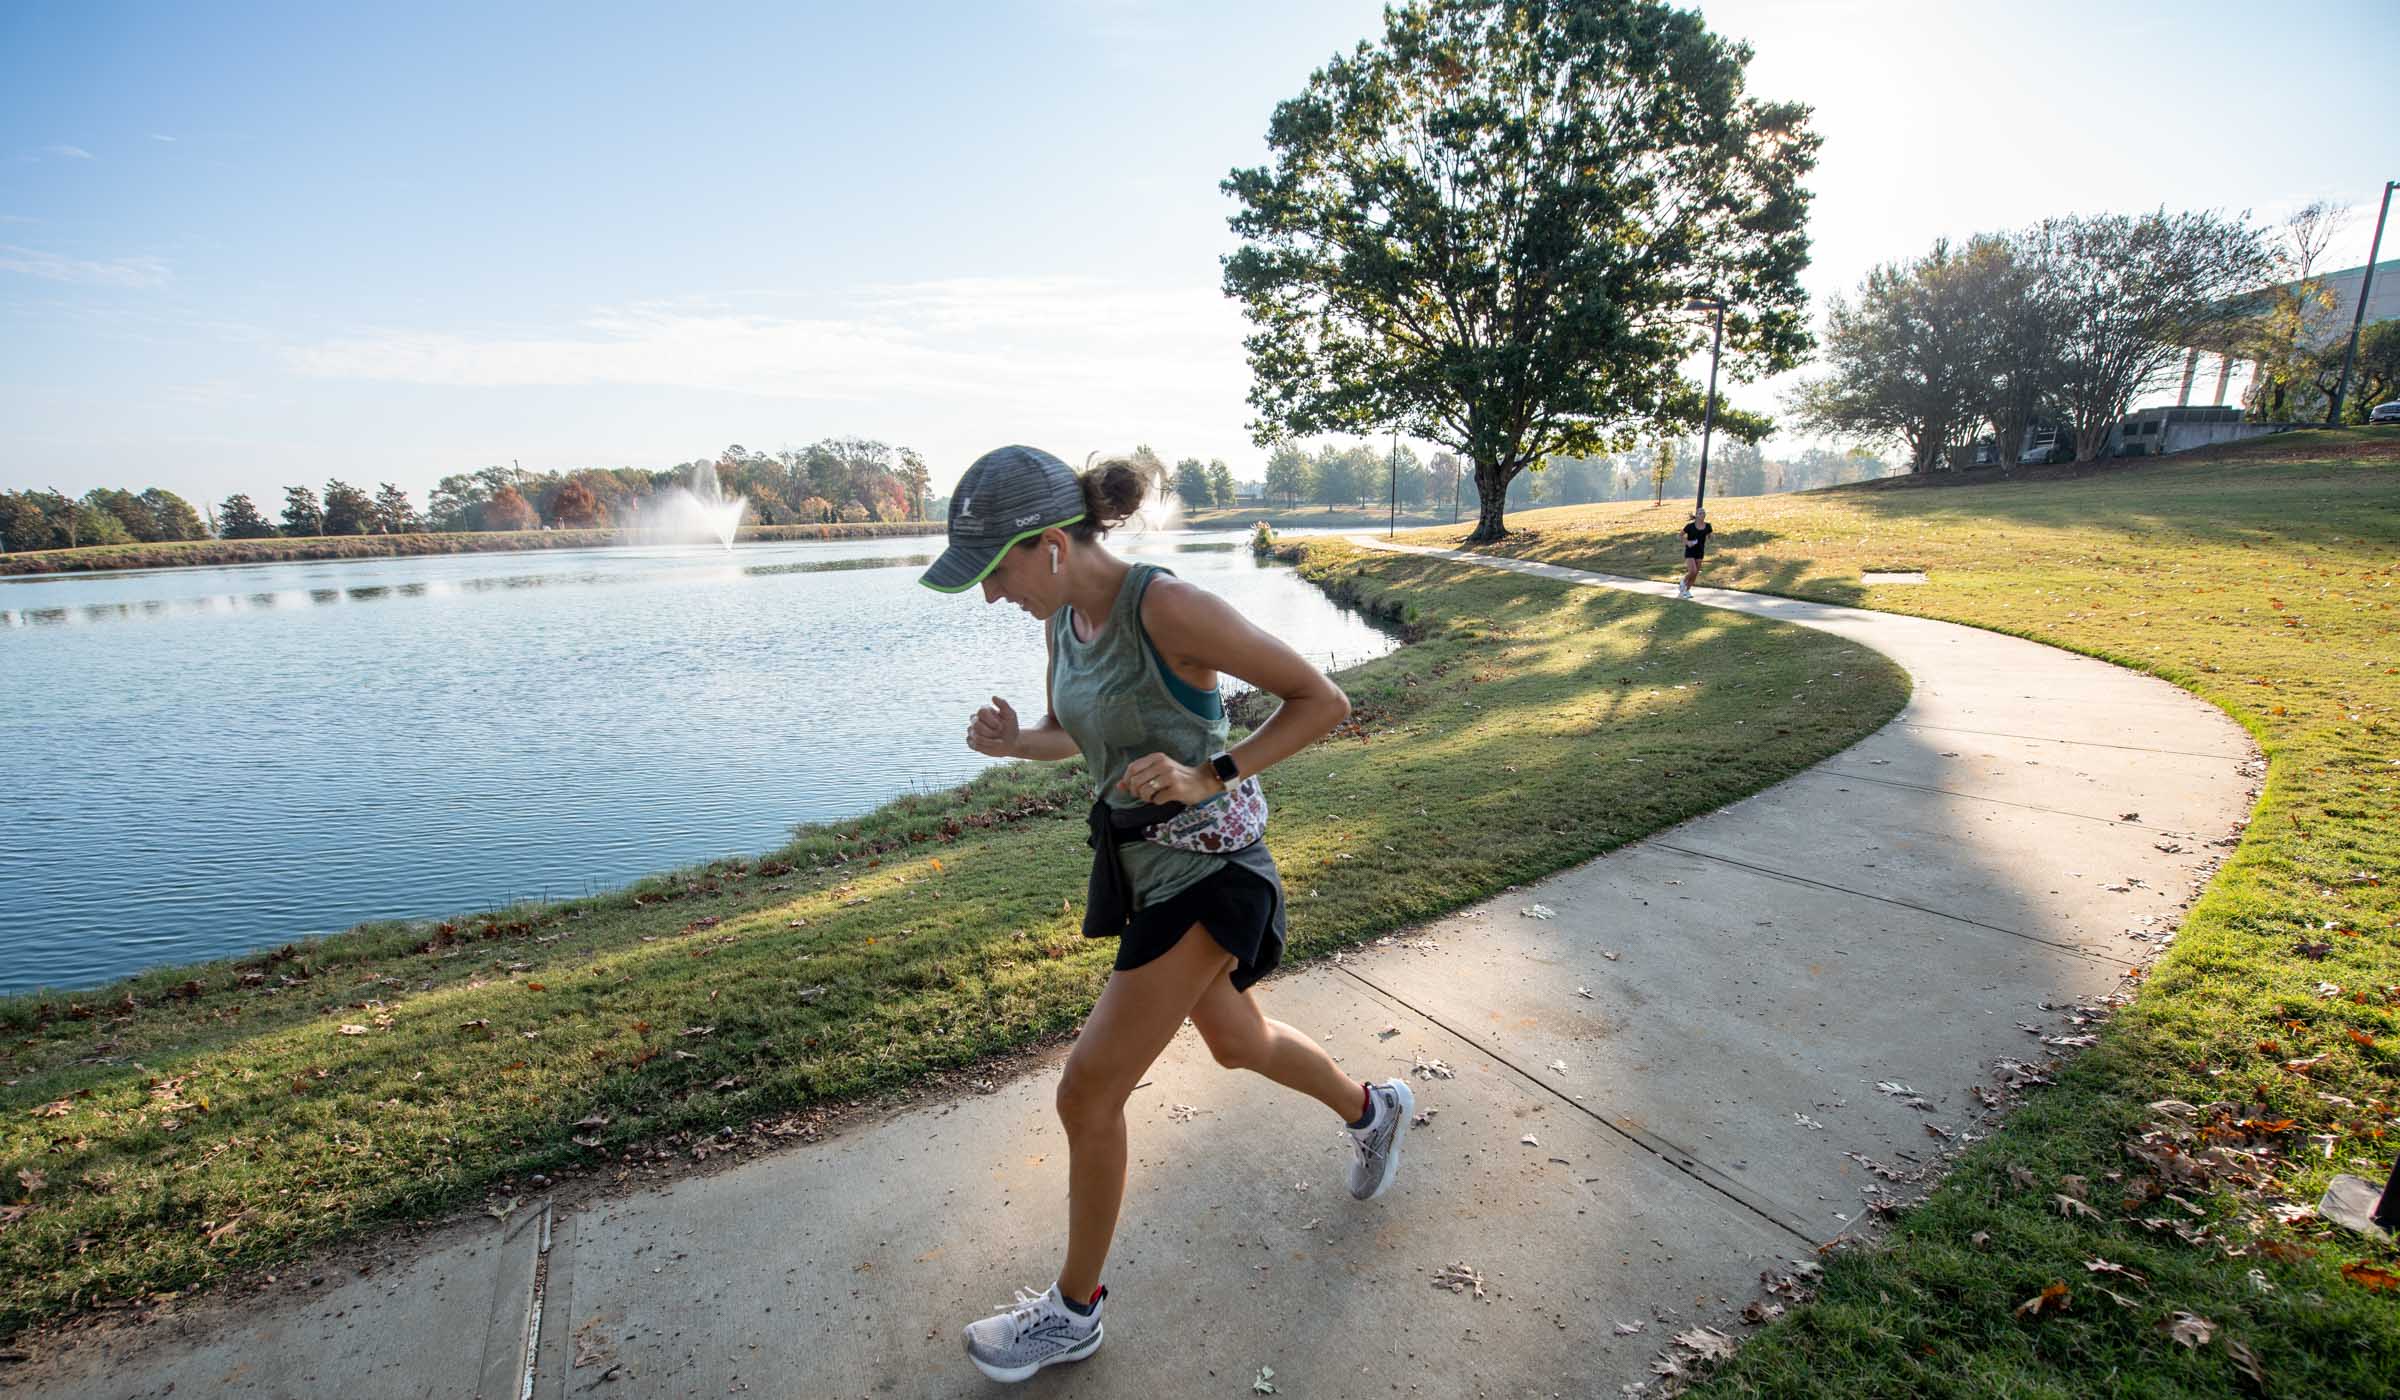 A female jogger runs on the sidewalk in the foreground, with Chadwick Lake and a tree in the background.